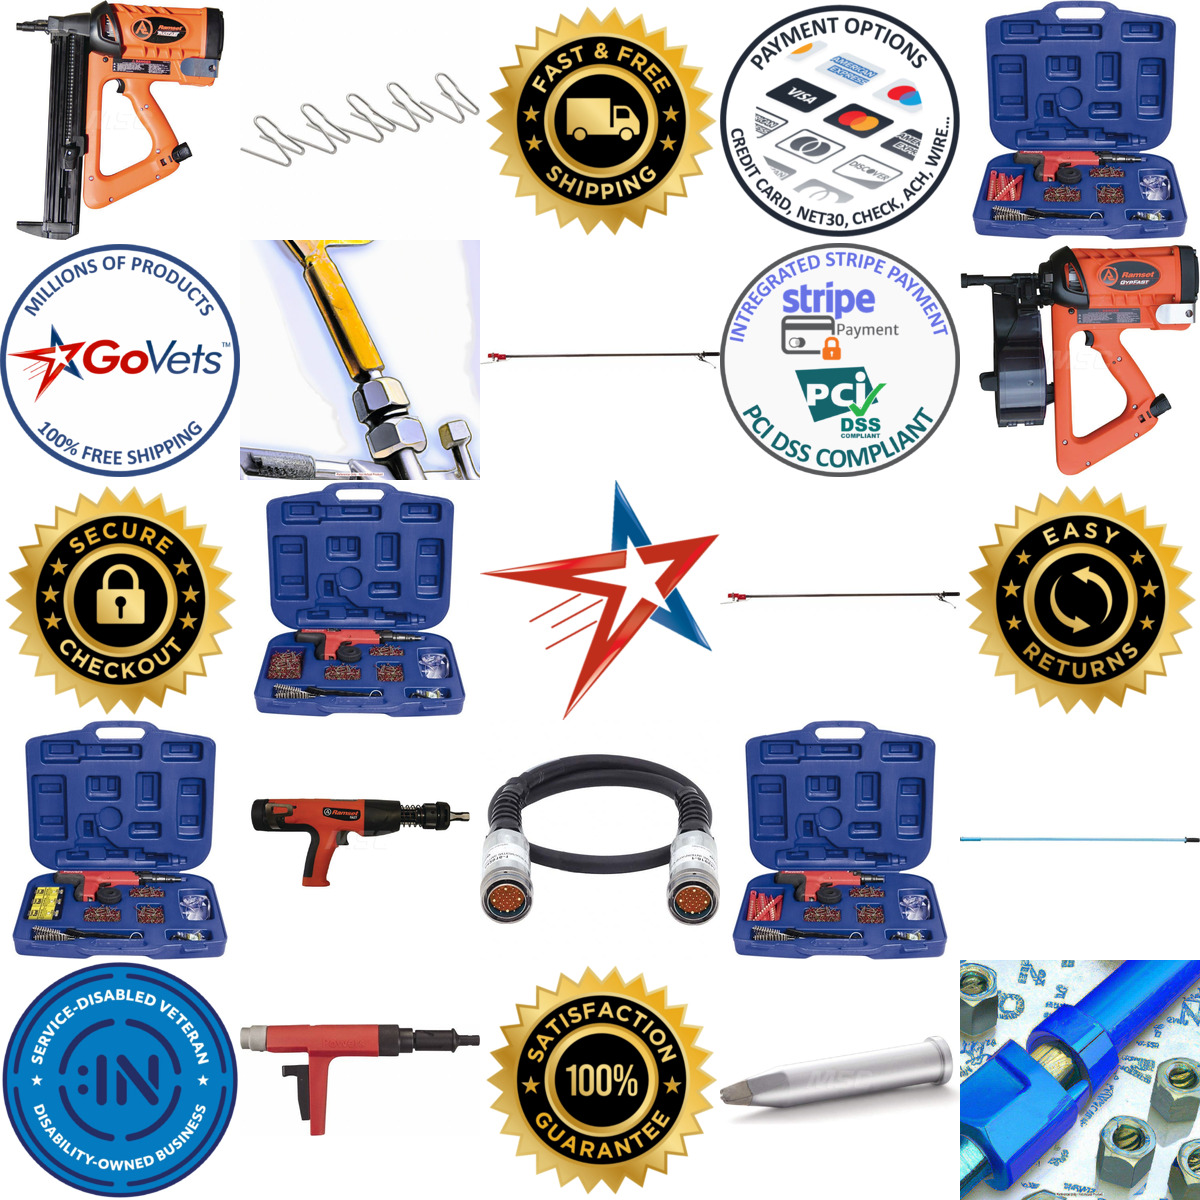 A selection of Powder Actuated Fastening Tools and Accessories products on GoVets